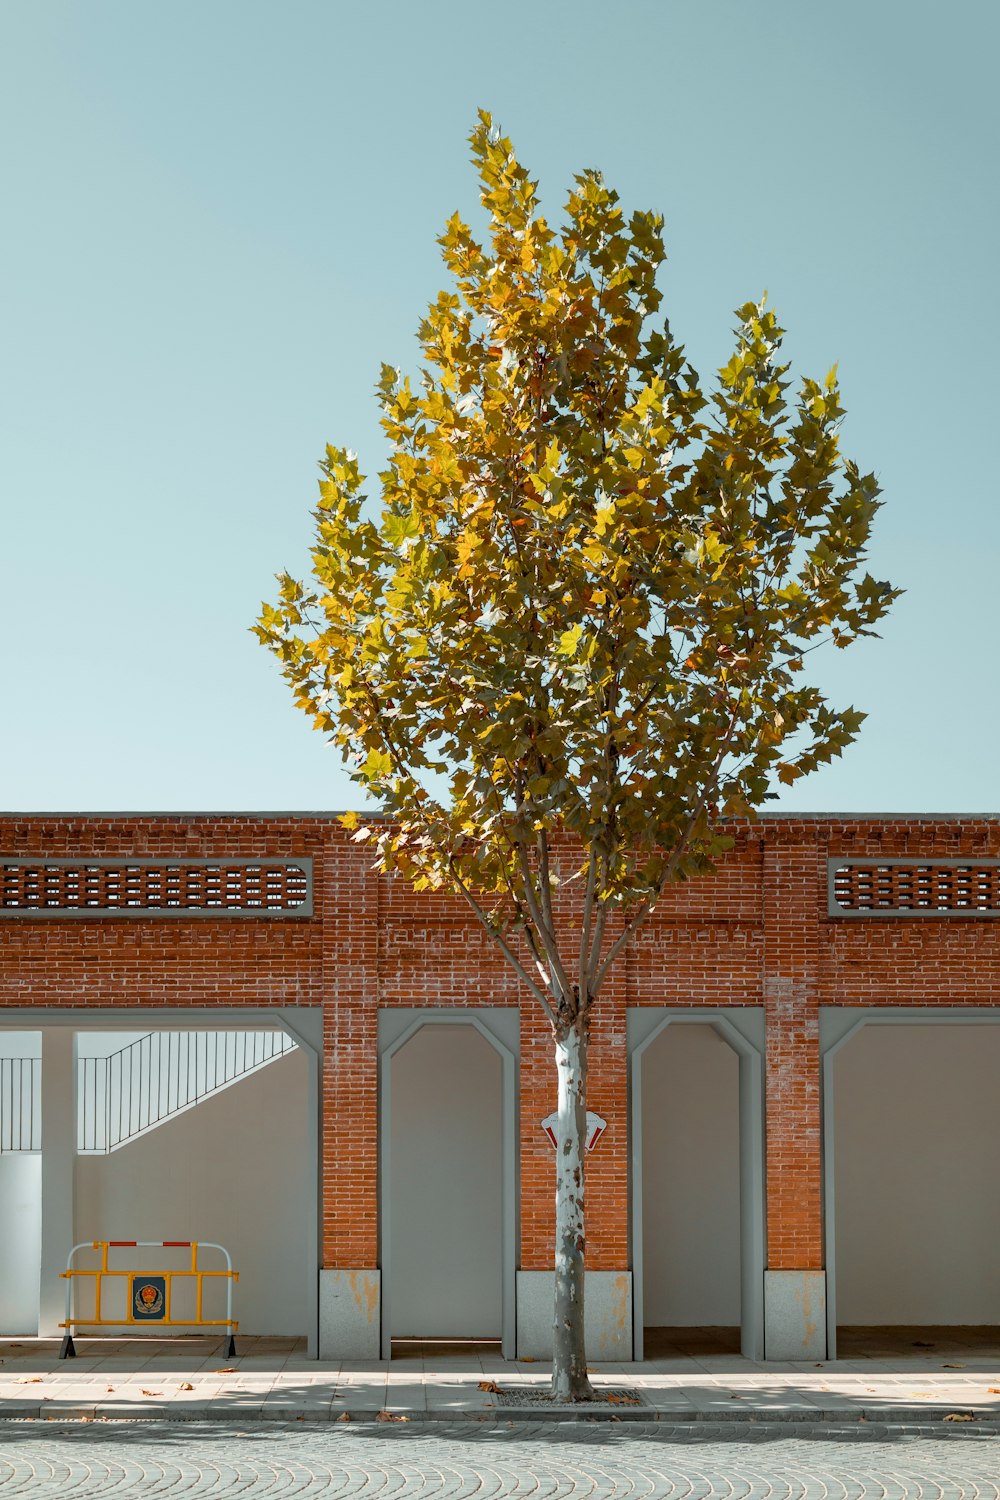 green tree in front of brown concrete building